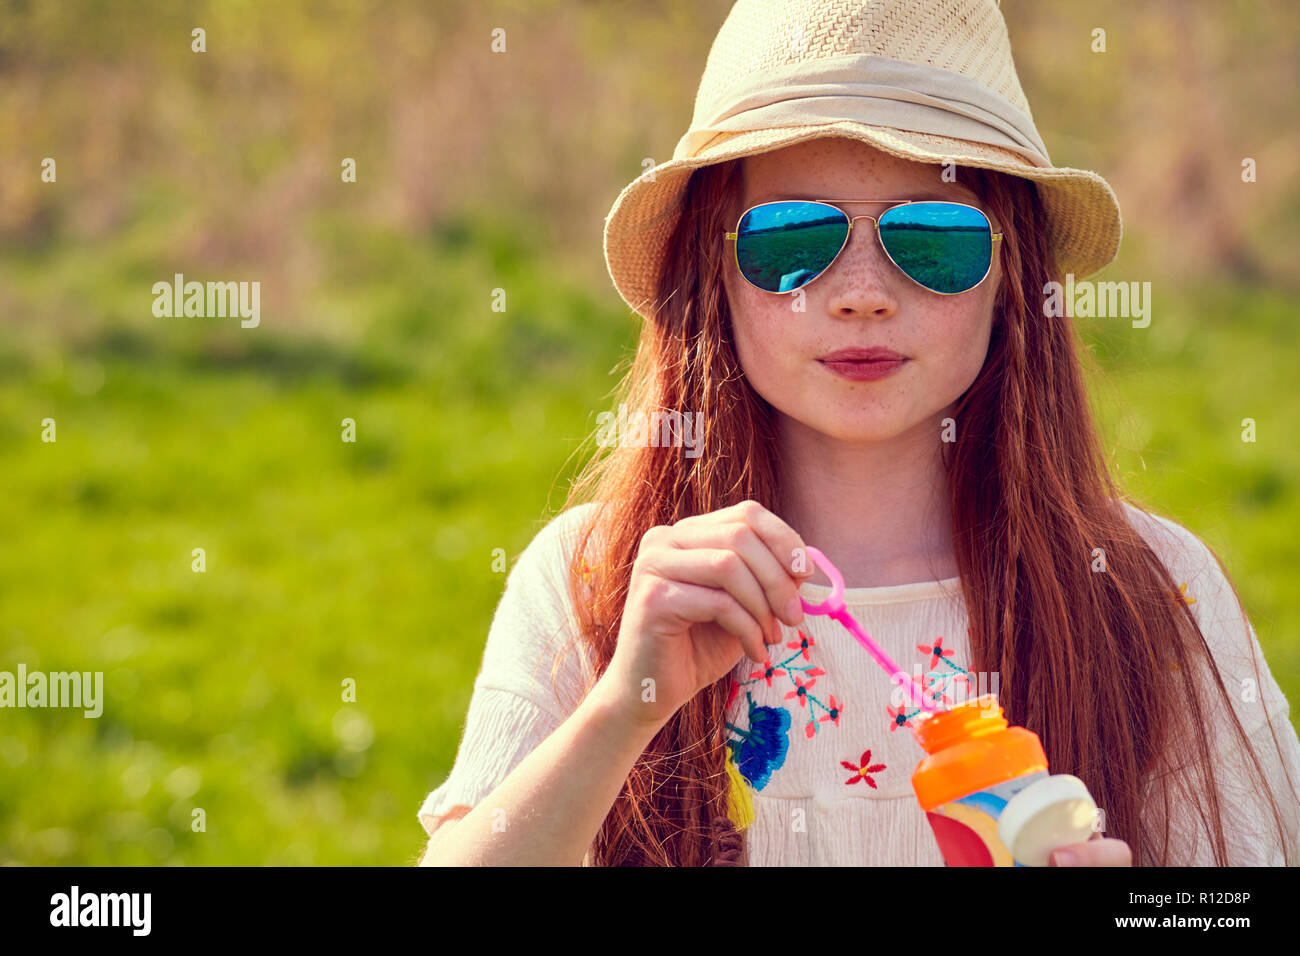 Girl playing with soap bubbles Stock Photo